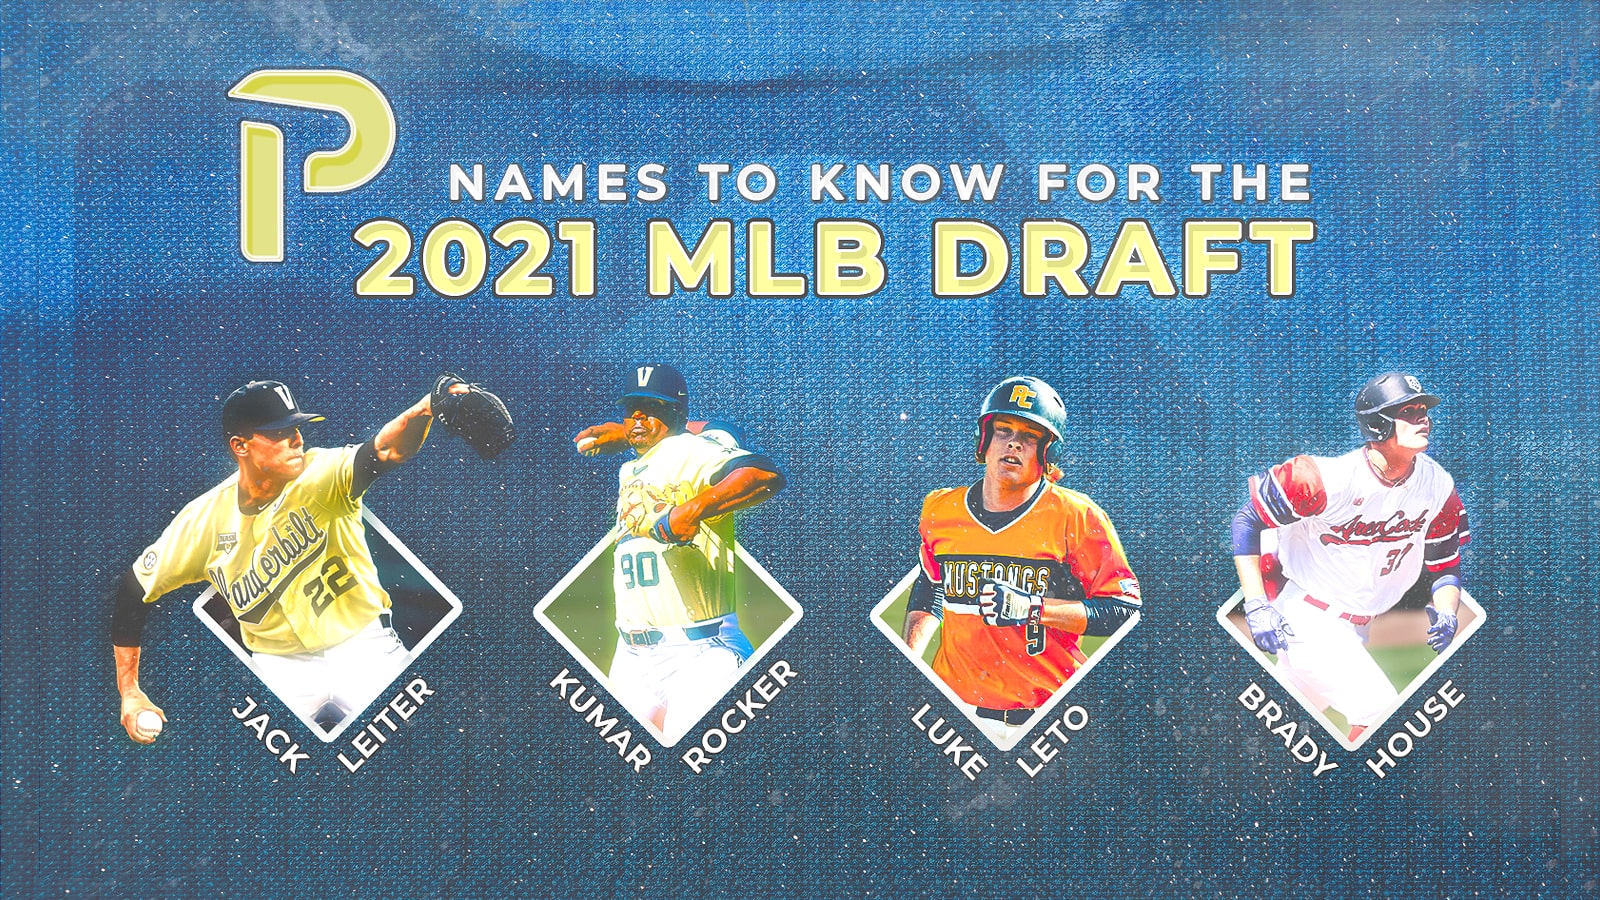 Names to Know for the 2021 MLB Draft